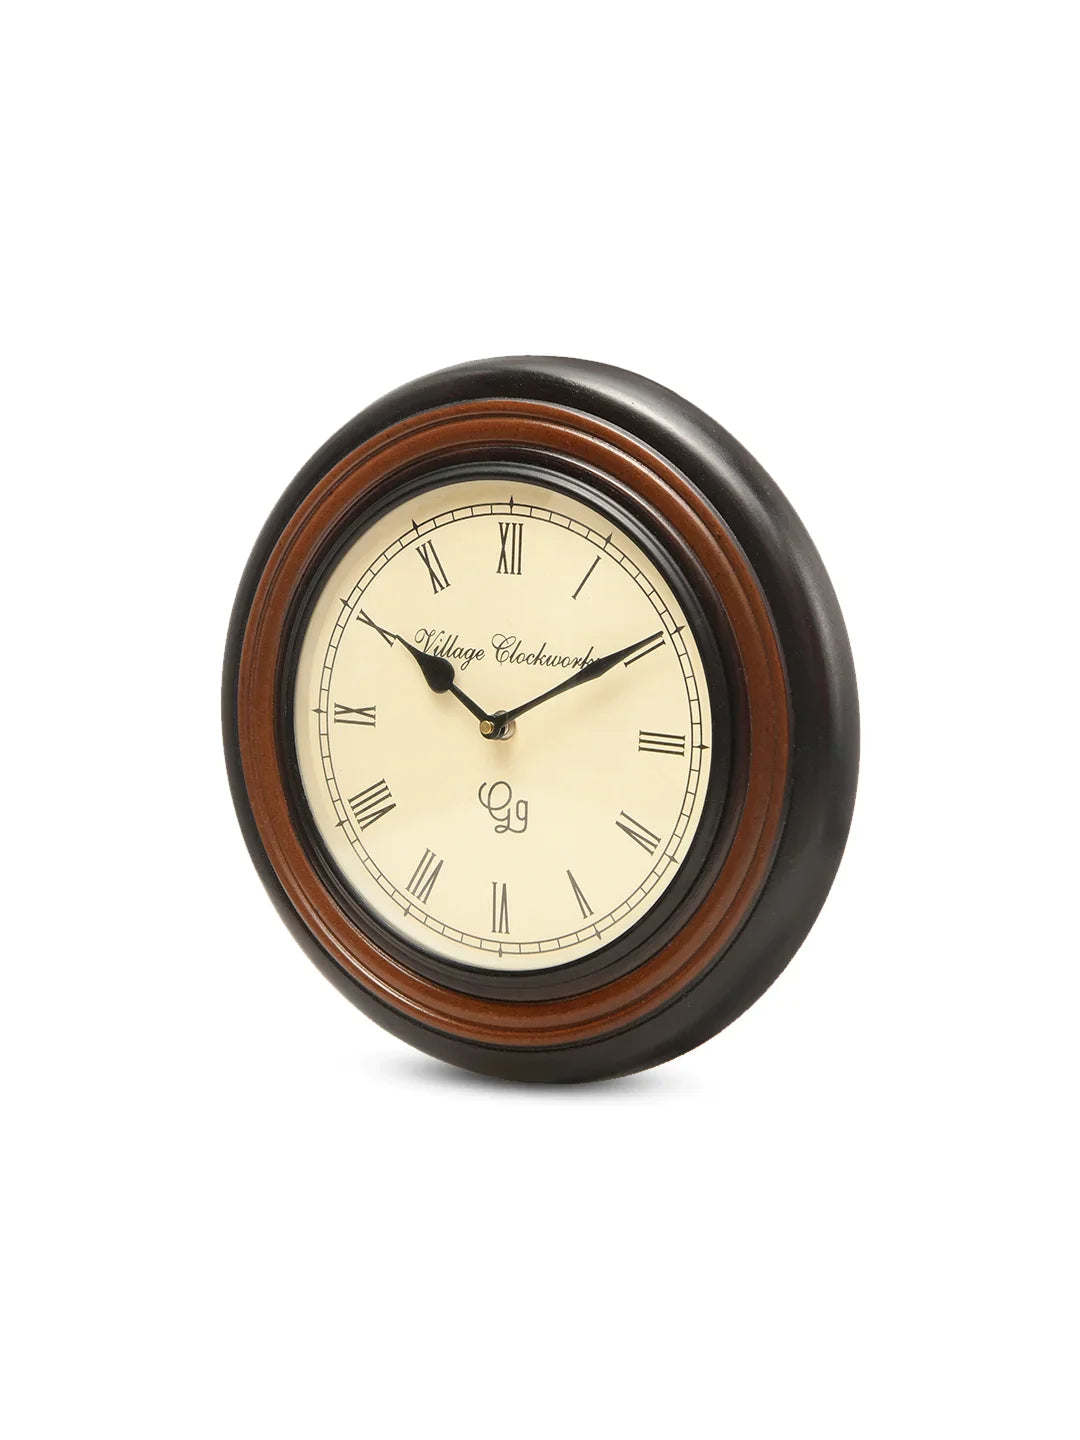 Round Wooden Polish Lining 12 Inches Analog Wall Clock